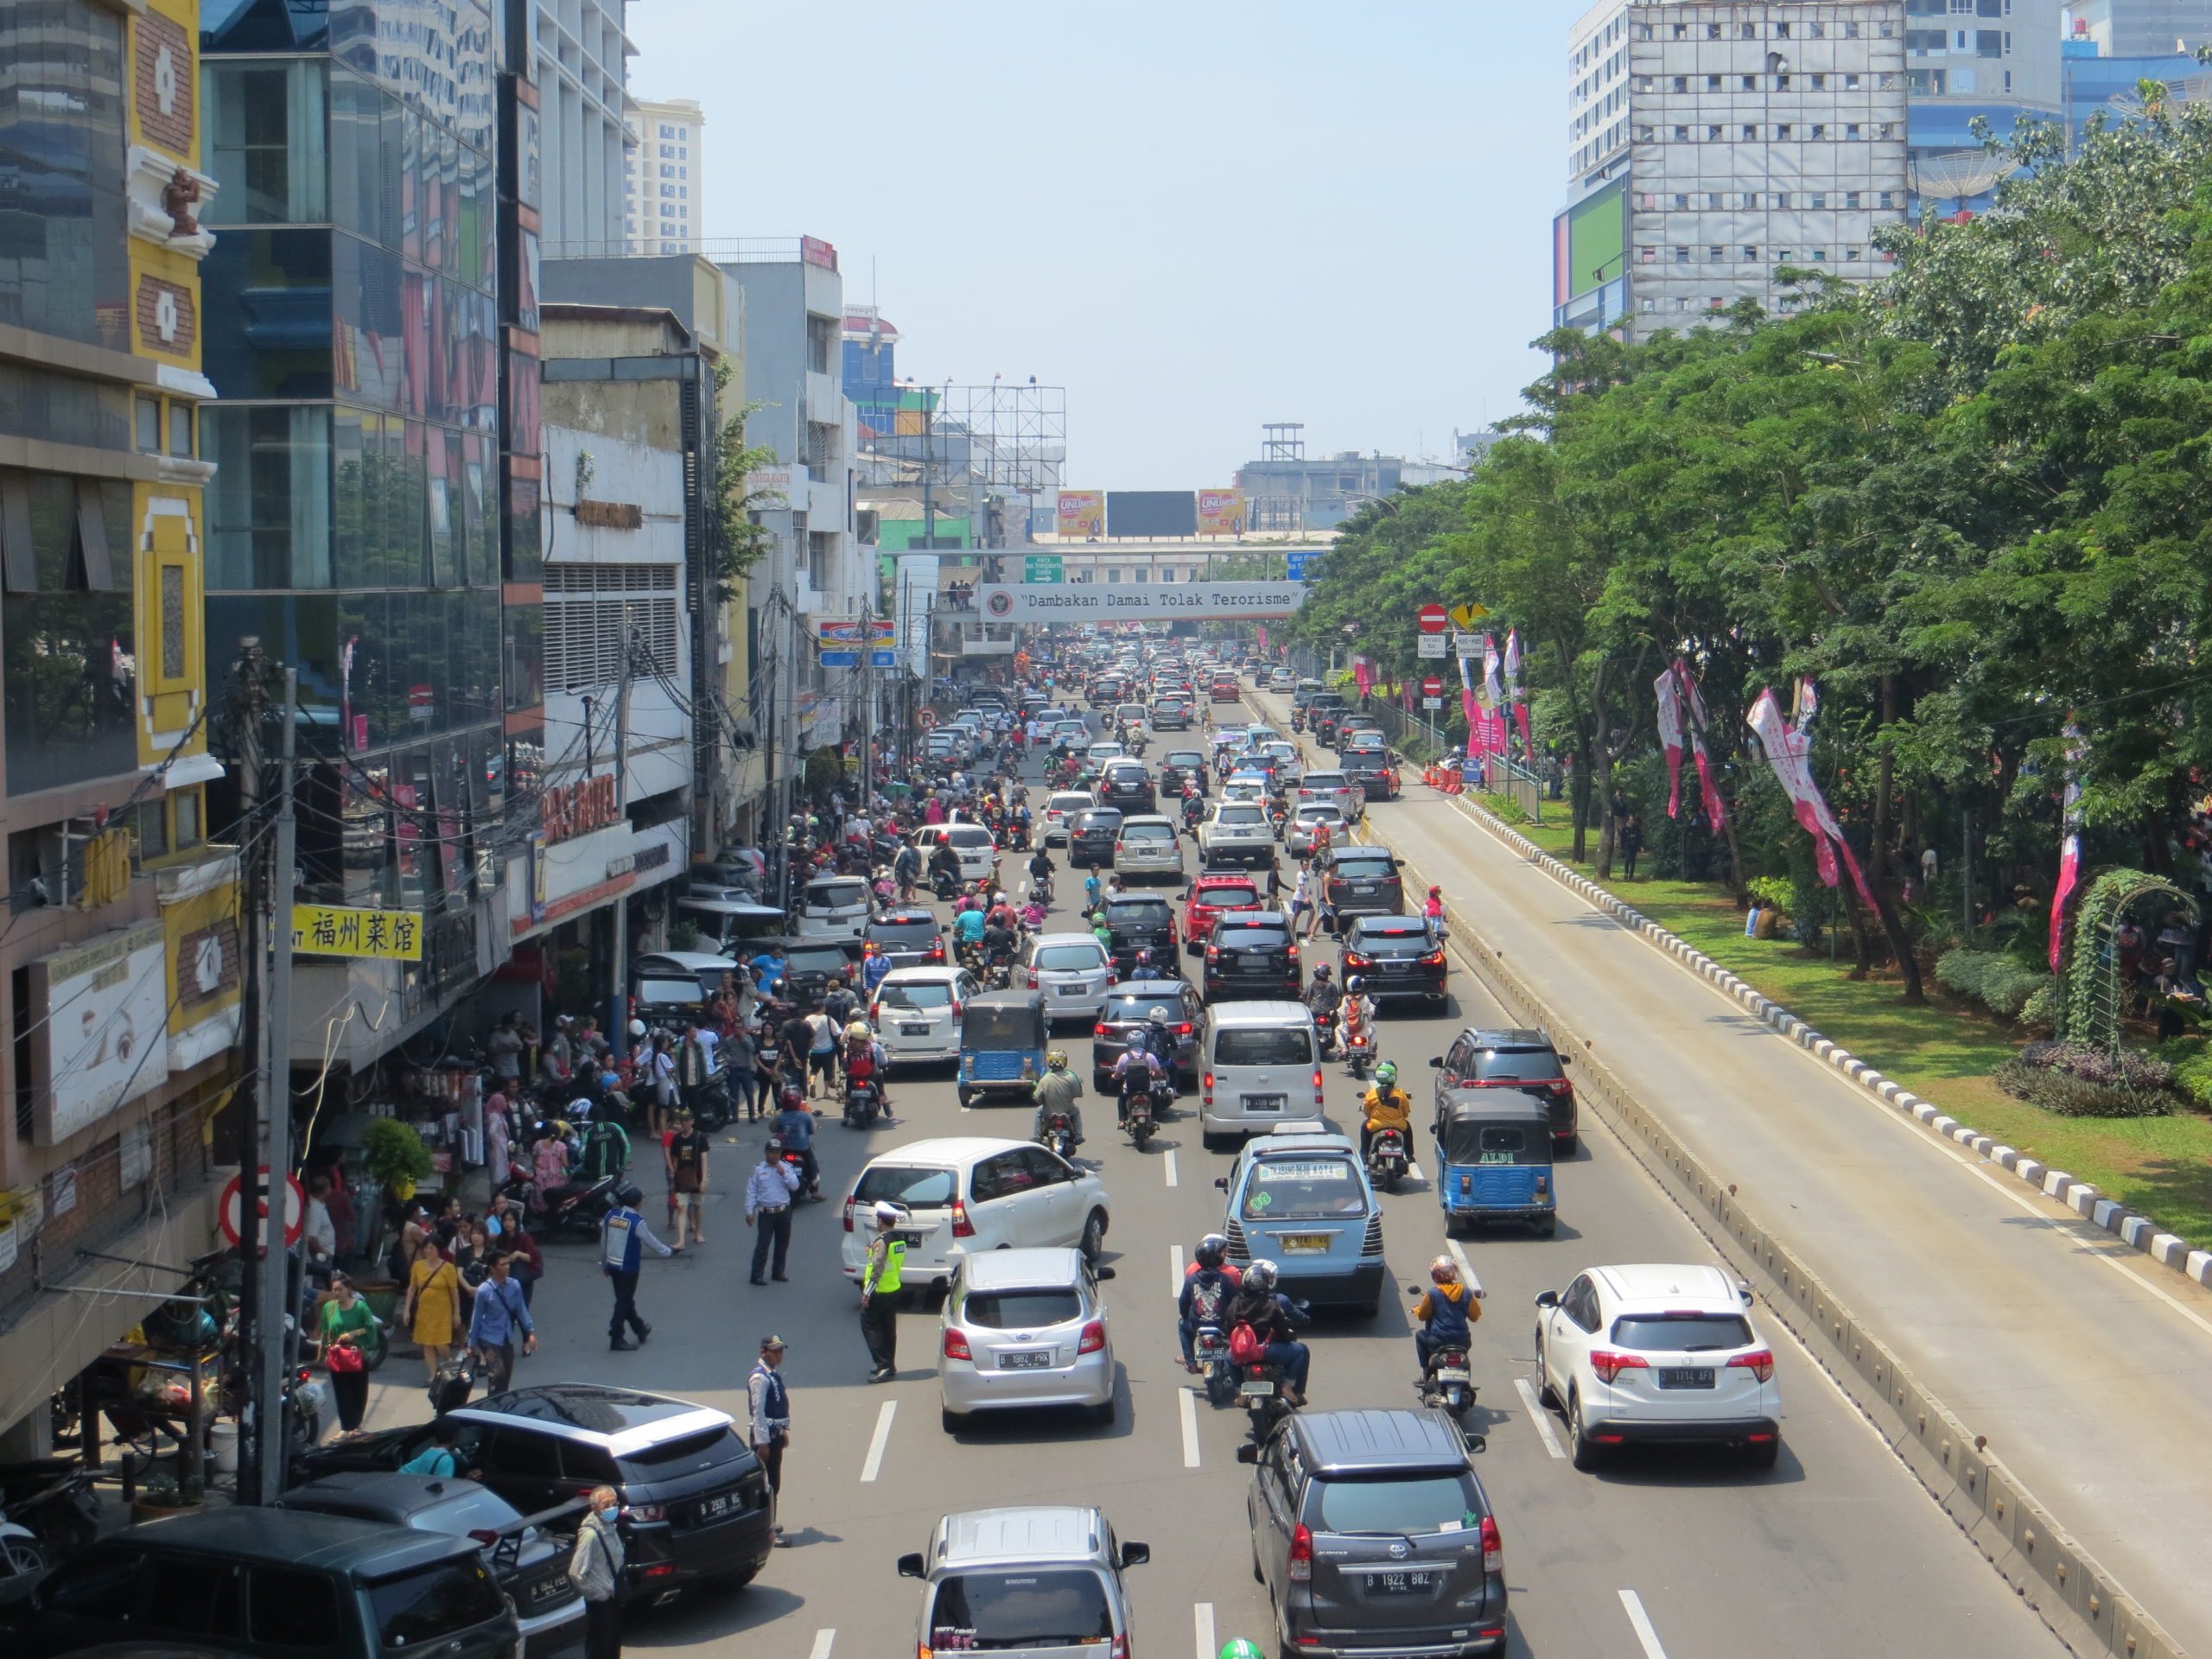 city of Jakarta with busy street and large traffic jam